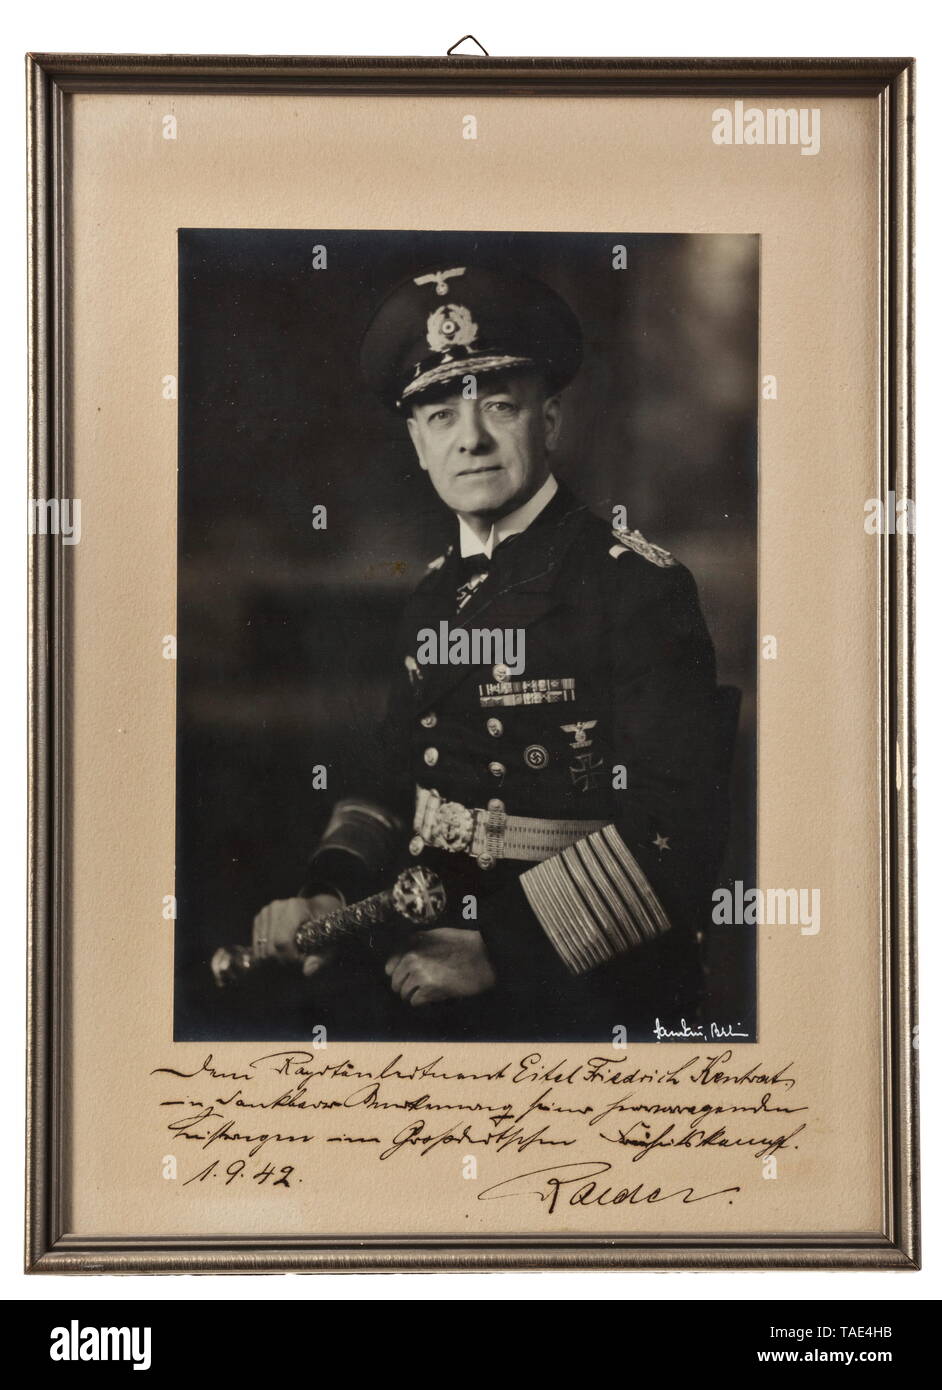 Knight's Cross bearer, corvette captain and commander of U-74 Eitel-Friedrich Kentrat - an honour plate of the U-Boat Force on the award of the Knight's Cross and an inscribed portrait from Erich Raeder White glazed porcelain plate manufactured by Meissen (sword mark), the blue décor depicting the awards of WWI and WWII submarine commanders on a laurel wreath and dedicated in yellow-gold to 'Herrn Korvettenkapitän Kentrat'. Reverse marked with 'N11Z' and the enrolment number '135'. Diameter 25.3 cm. Together with a presentation portrait with inscription by Großadmiral Raede, Editorial-Use-Only Stock Photo